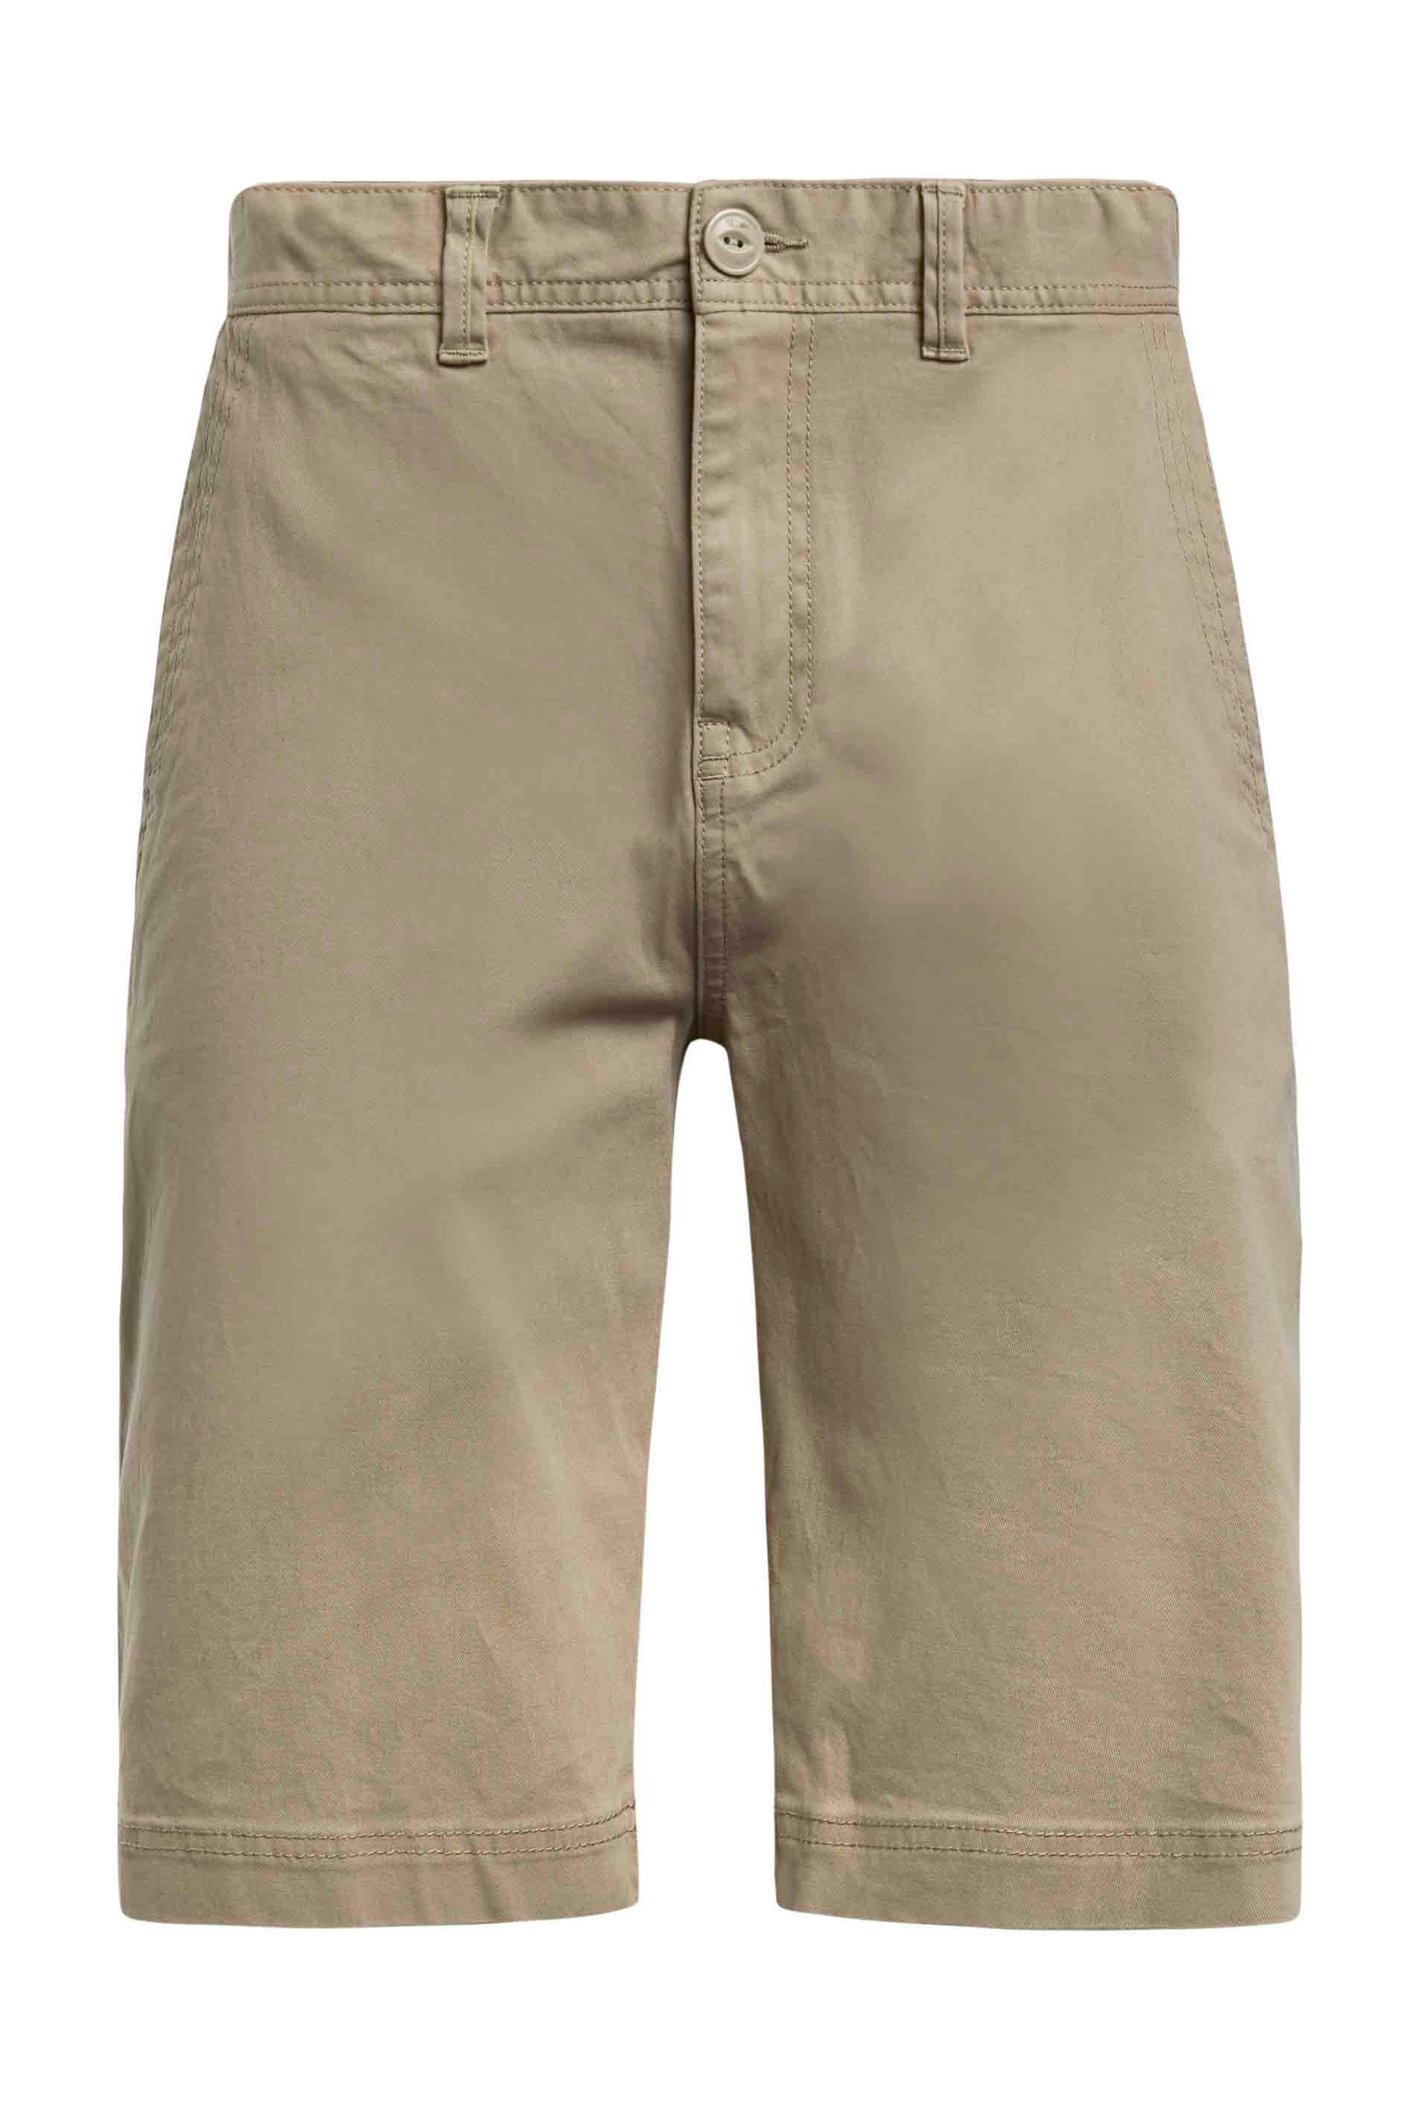 Weird Fish Rayburn Flat Front Shorts Taupe Grey Size 34